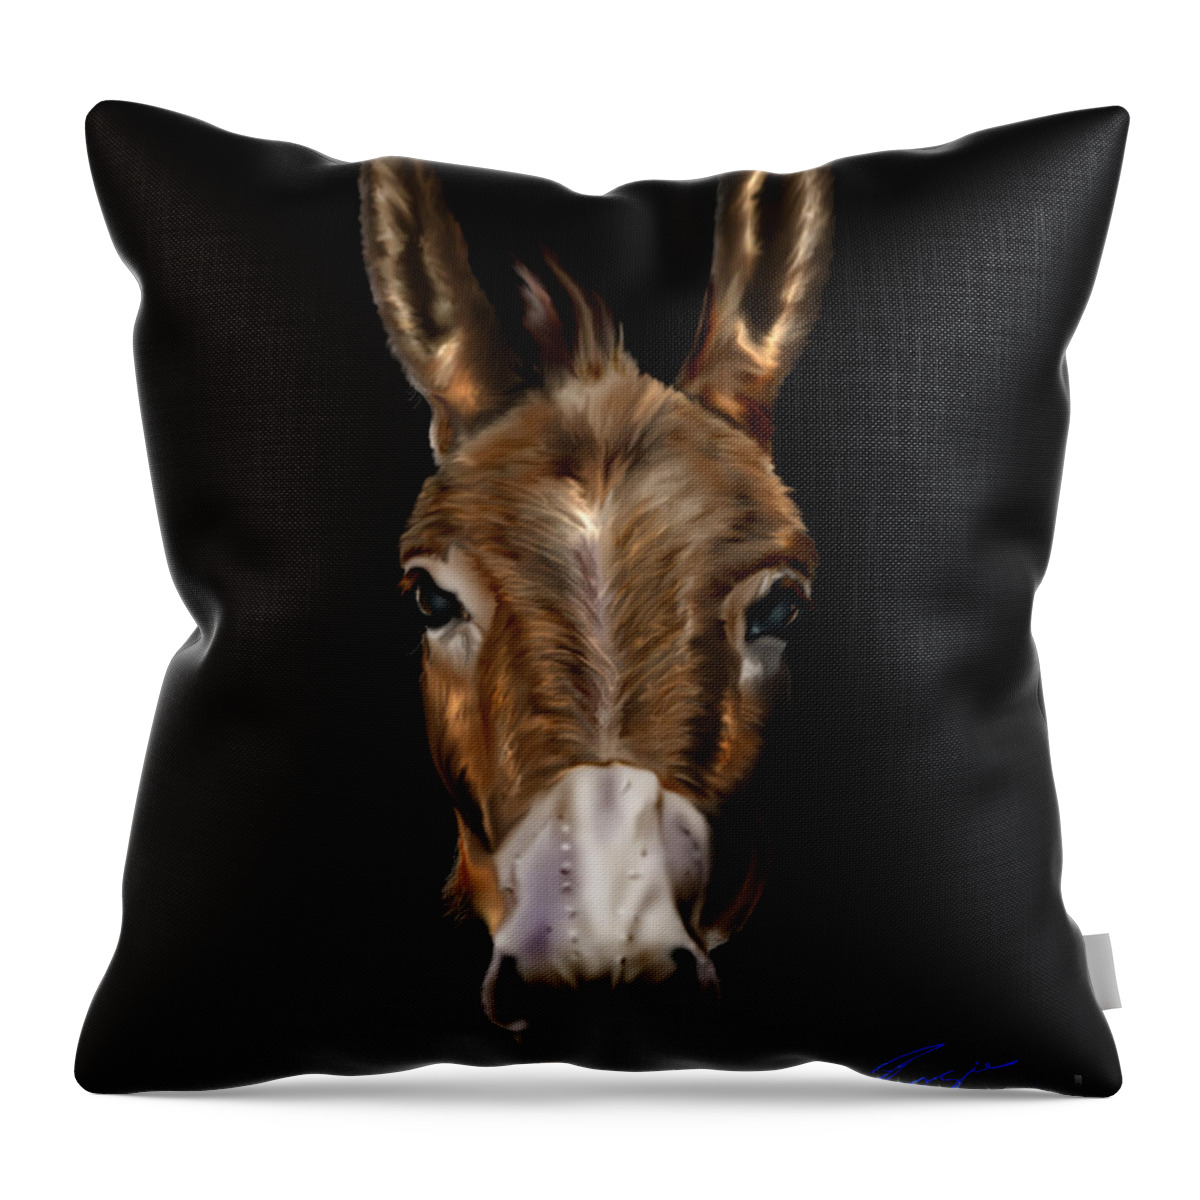 Horse Throw Pillow featuring the painting Dem-Donkey by Reggie Duffie